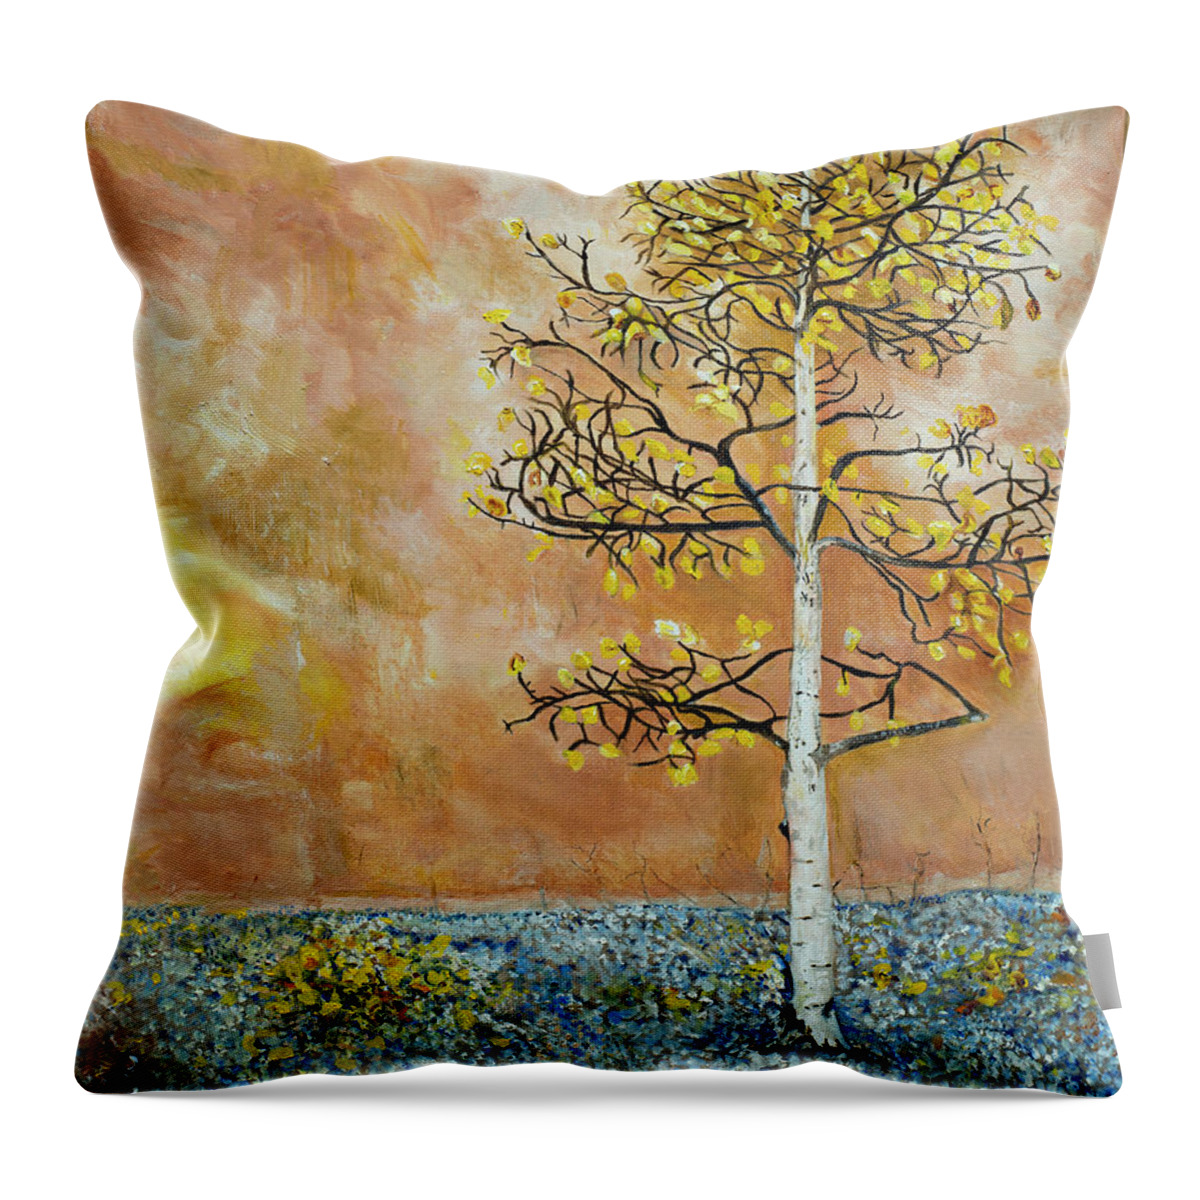 Corals Throw Pillow featuring the painting Storytree by Kathy Knopp